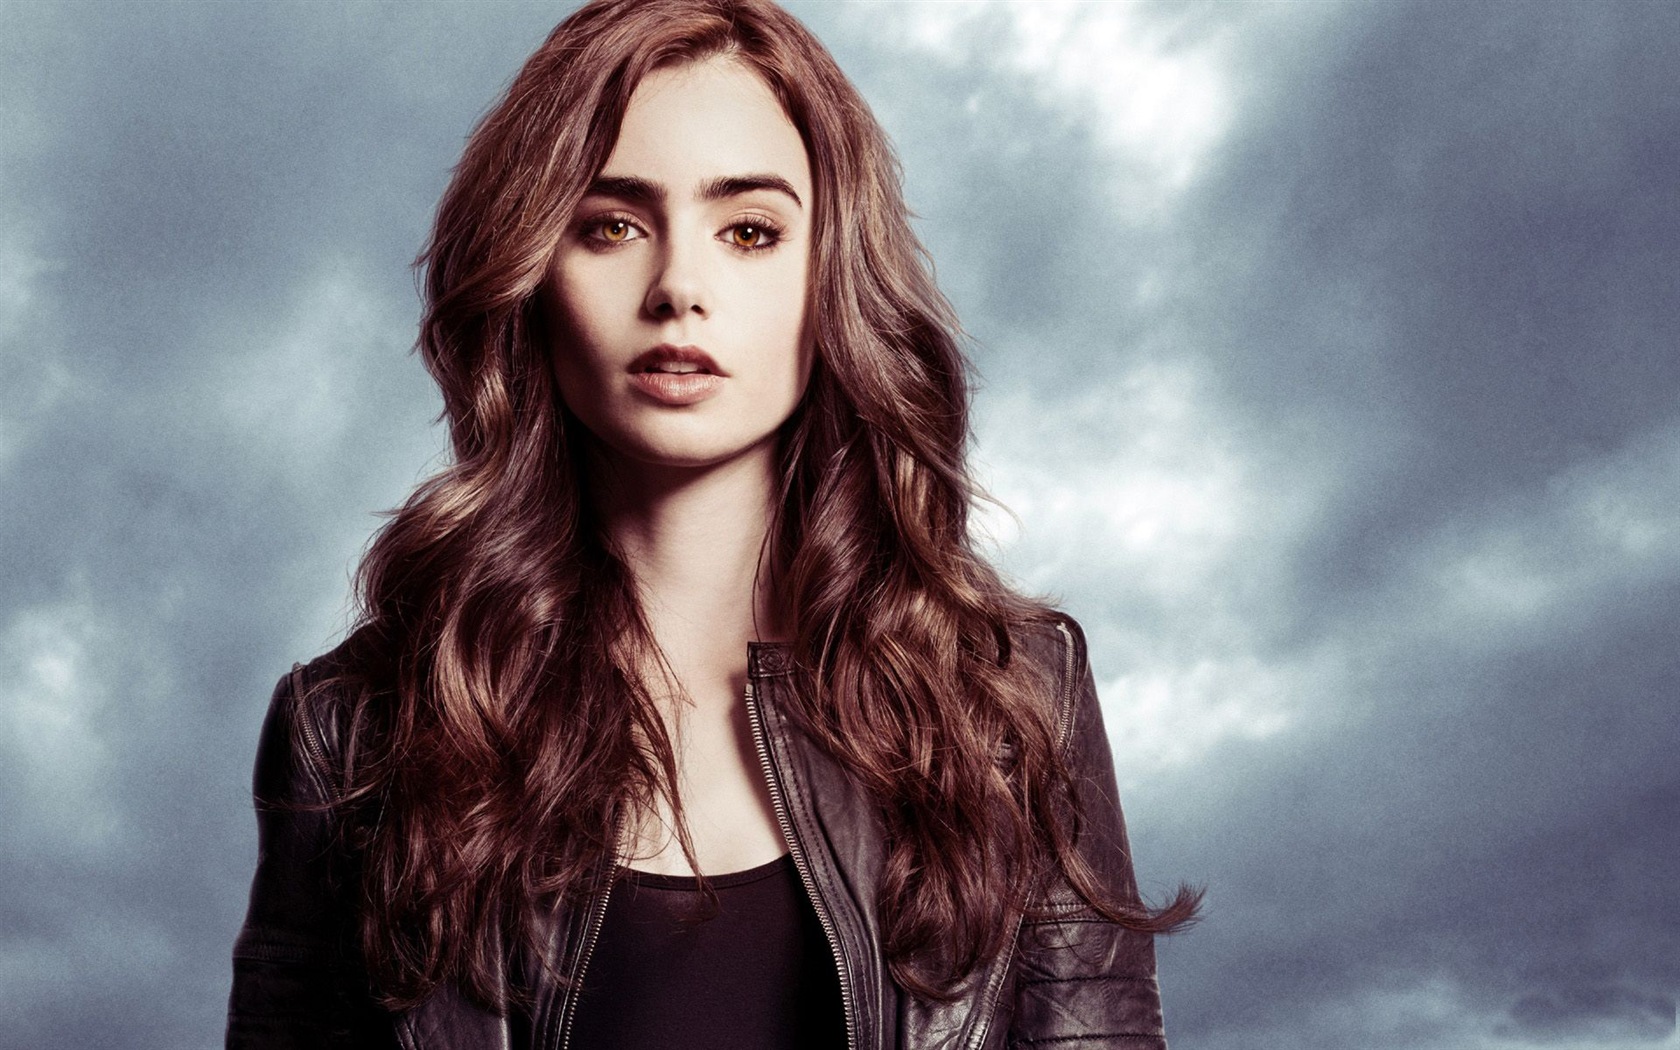 Lily Collins beautiful wallpapers #18 - 1680x1050